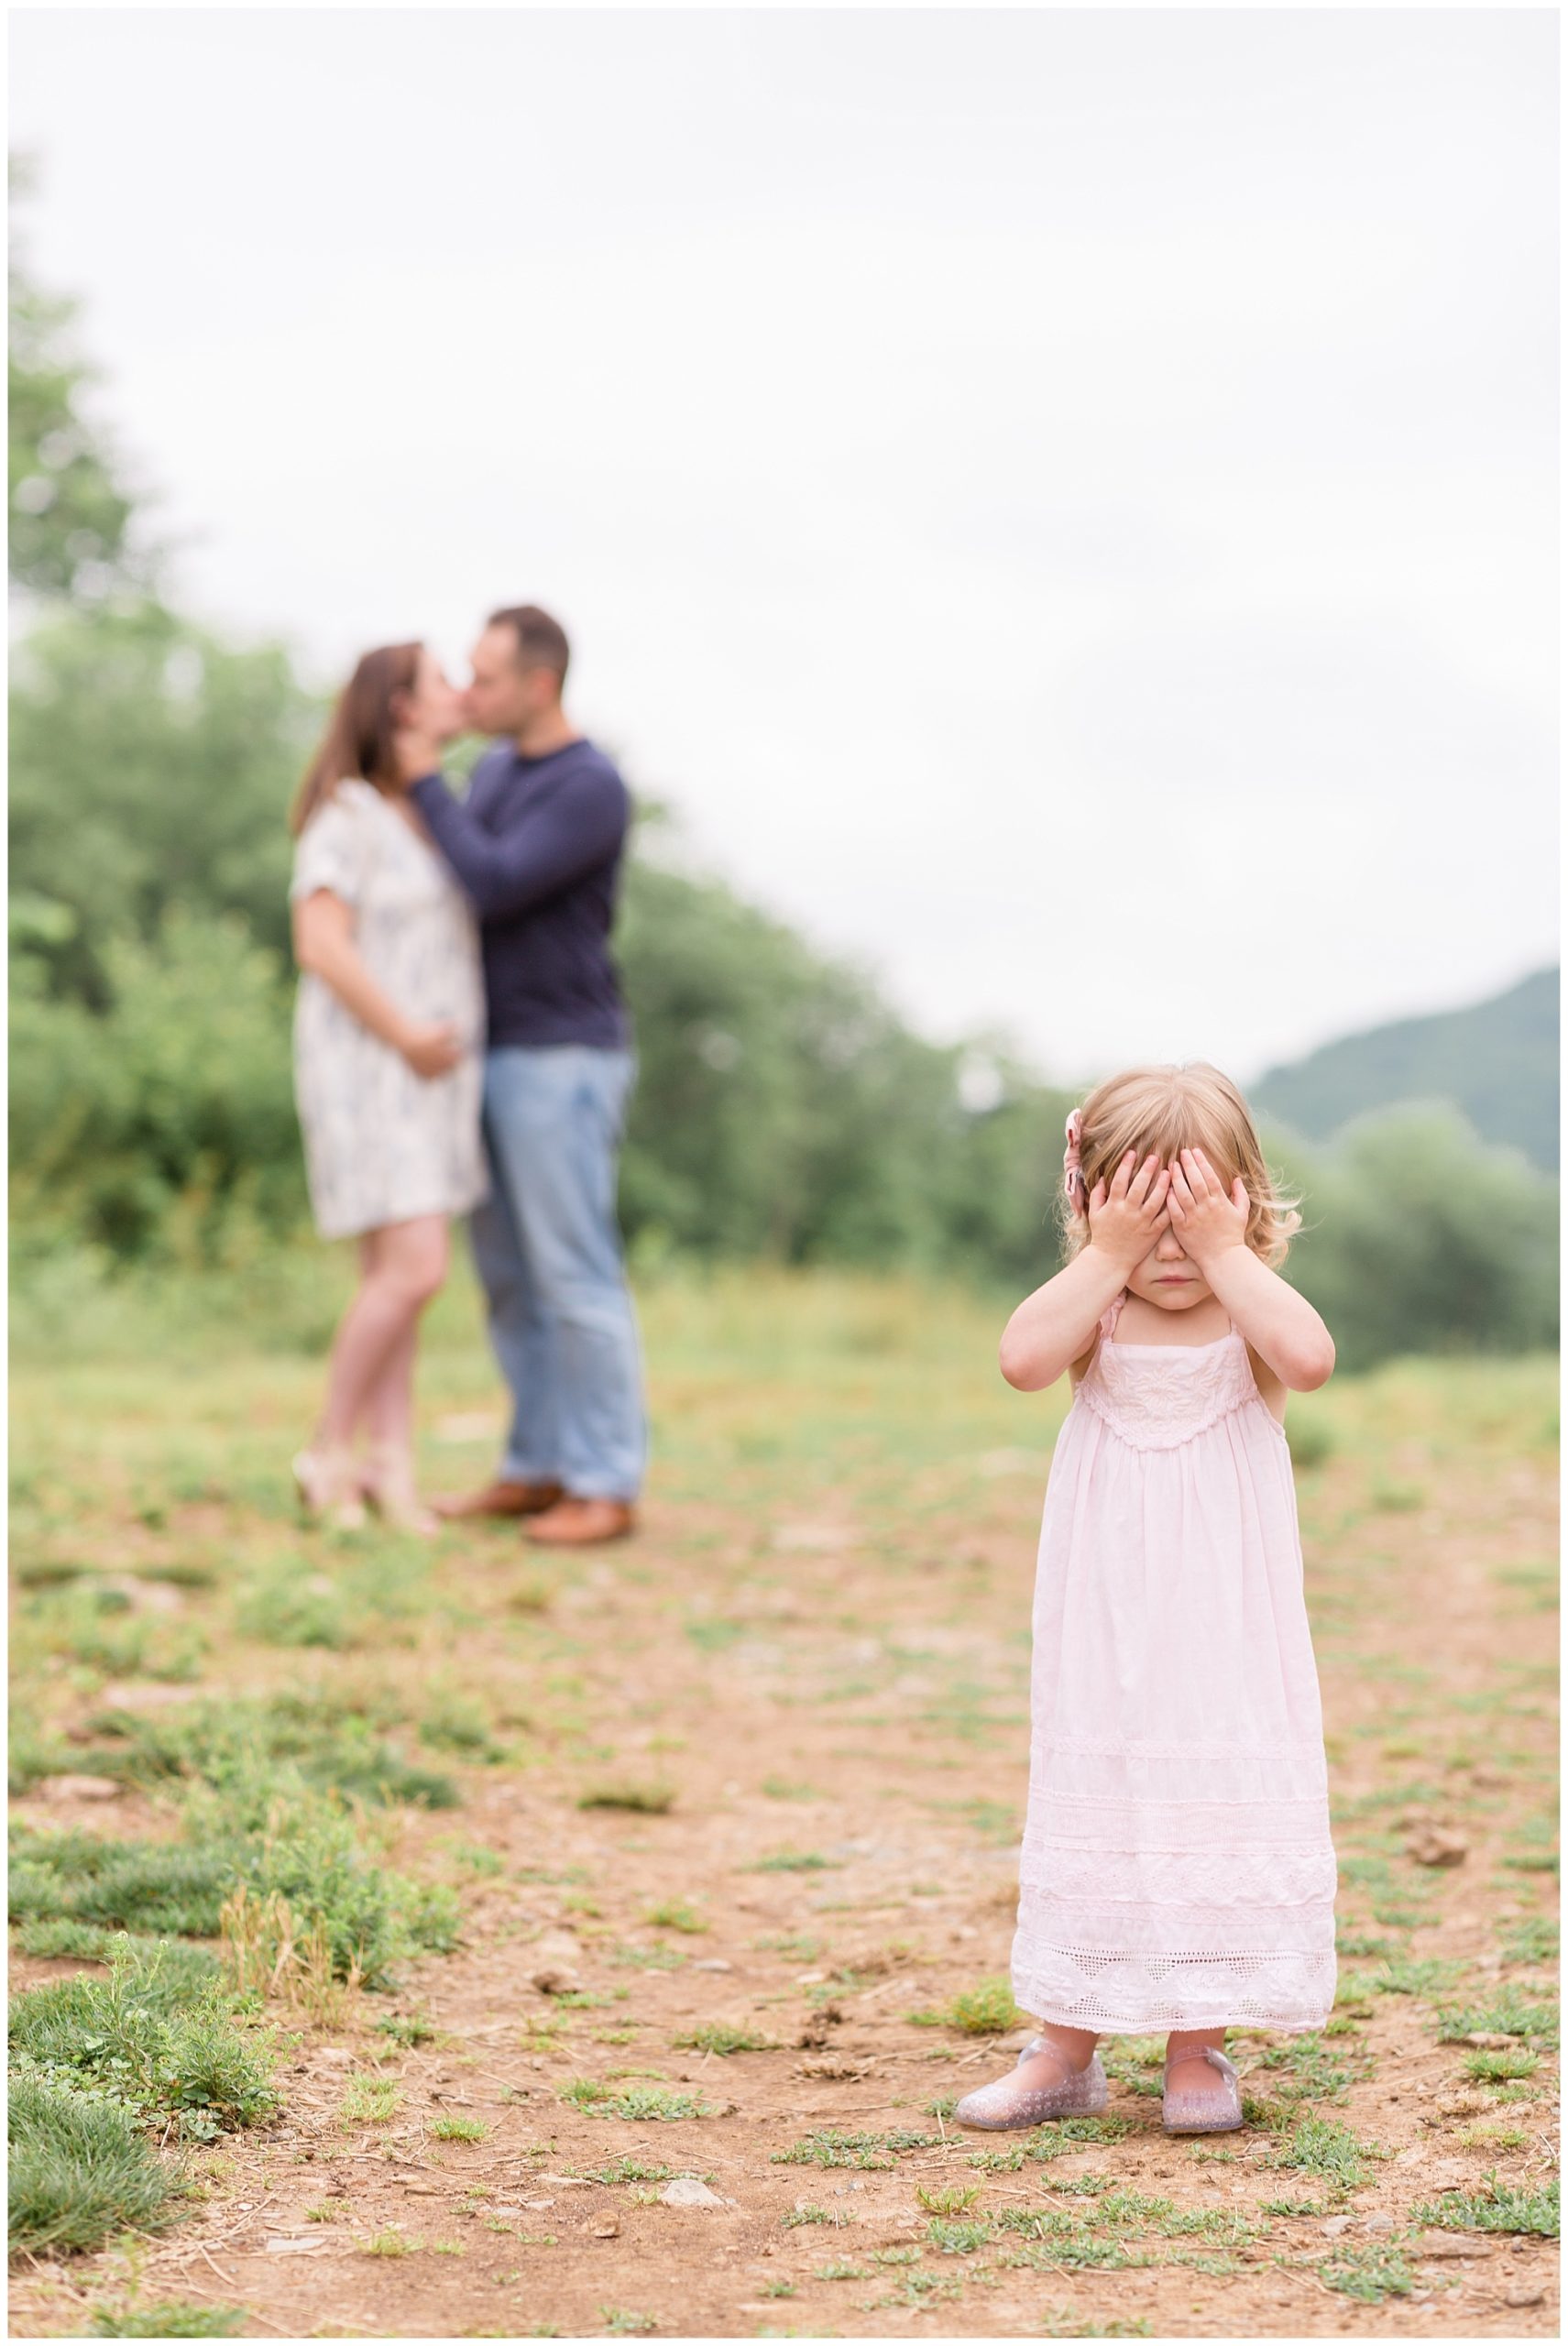 No peeking! This sweet little girl is hiding her eyes while mom and dad steal a kiss. She is wearing a soft pink long dress with lace embellishments and a matching pink bow. This session is featured on our monthly membership called "Behind the Lens". Make sure to check out the blog for more information!